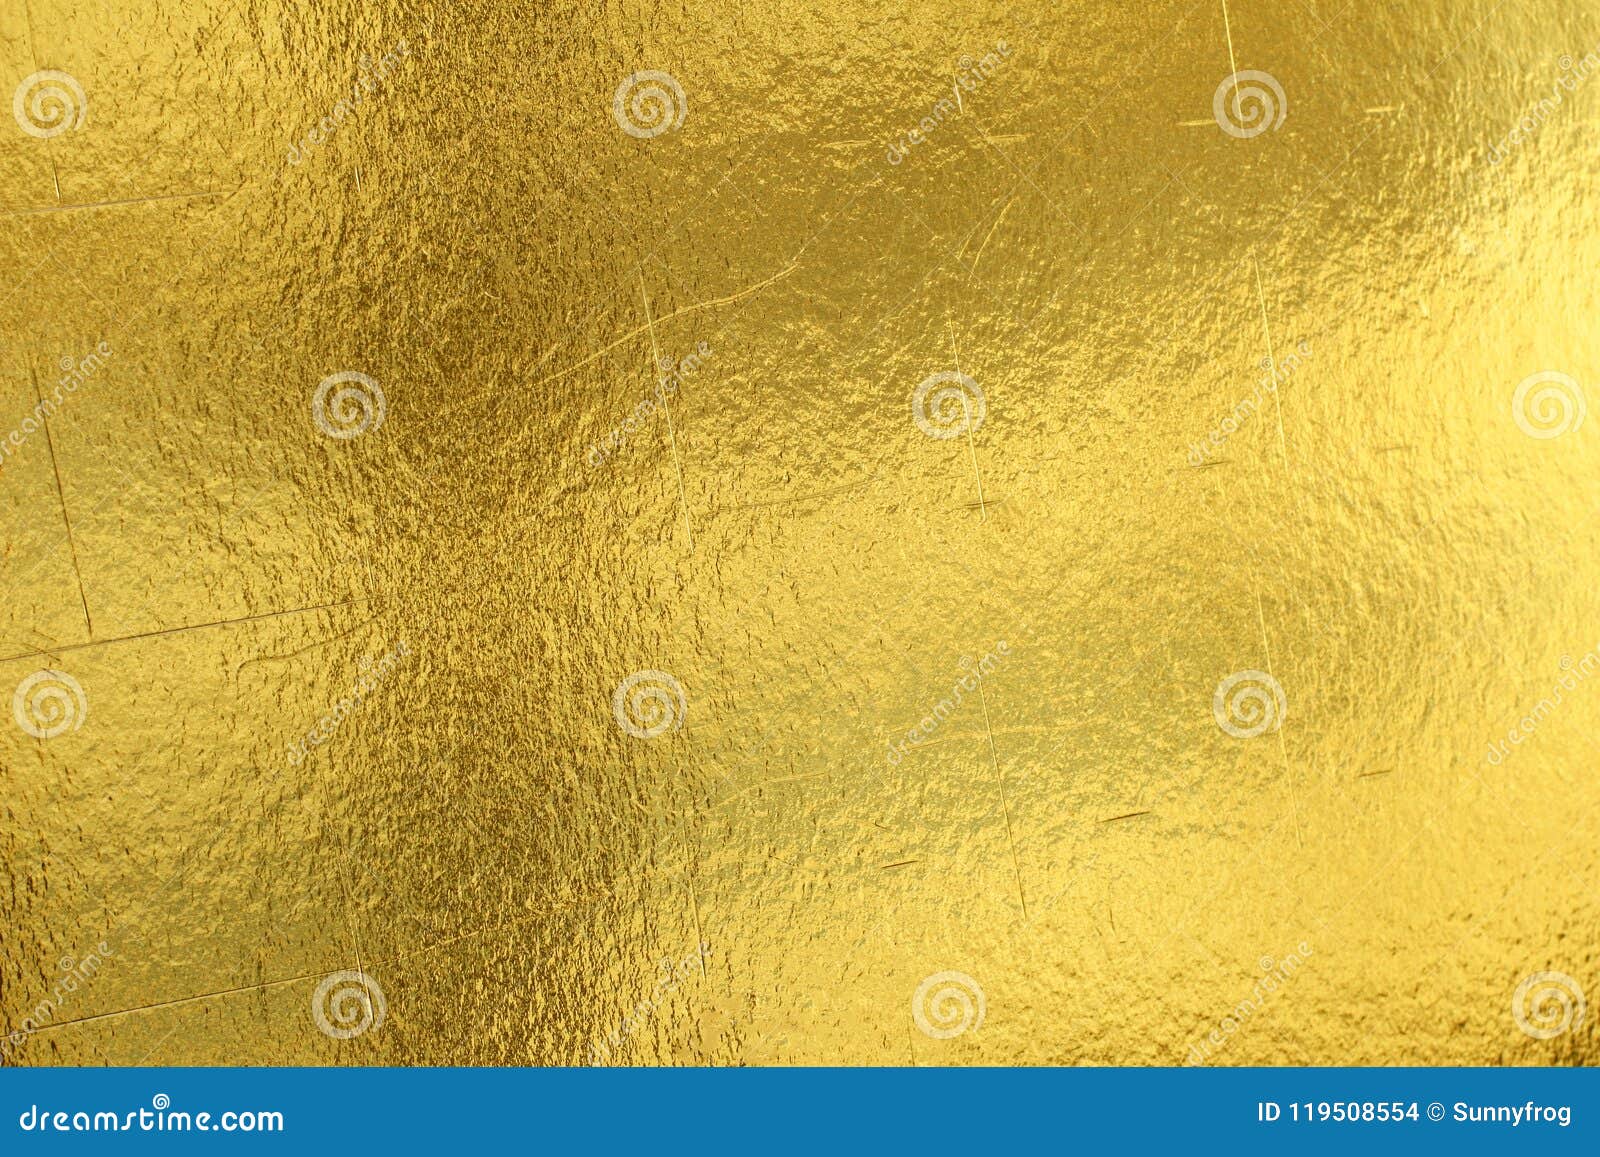 shiny yellow leaf gold foil texture background